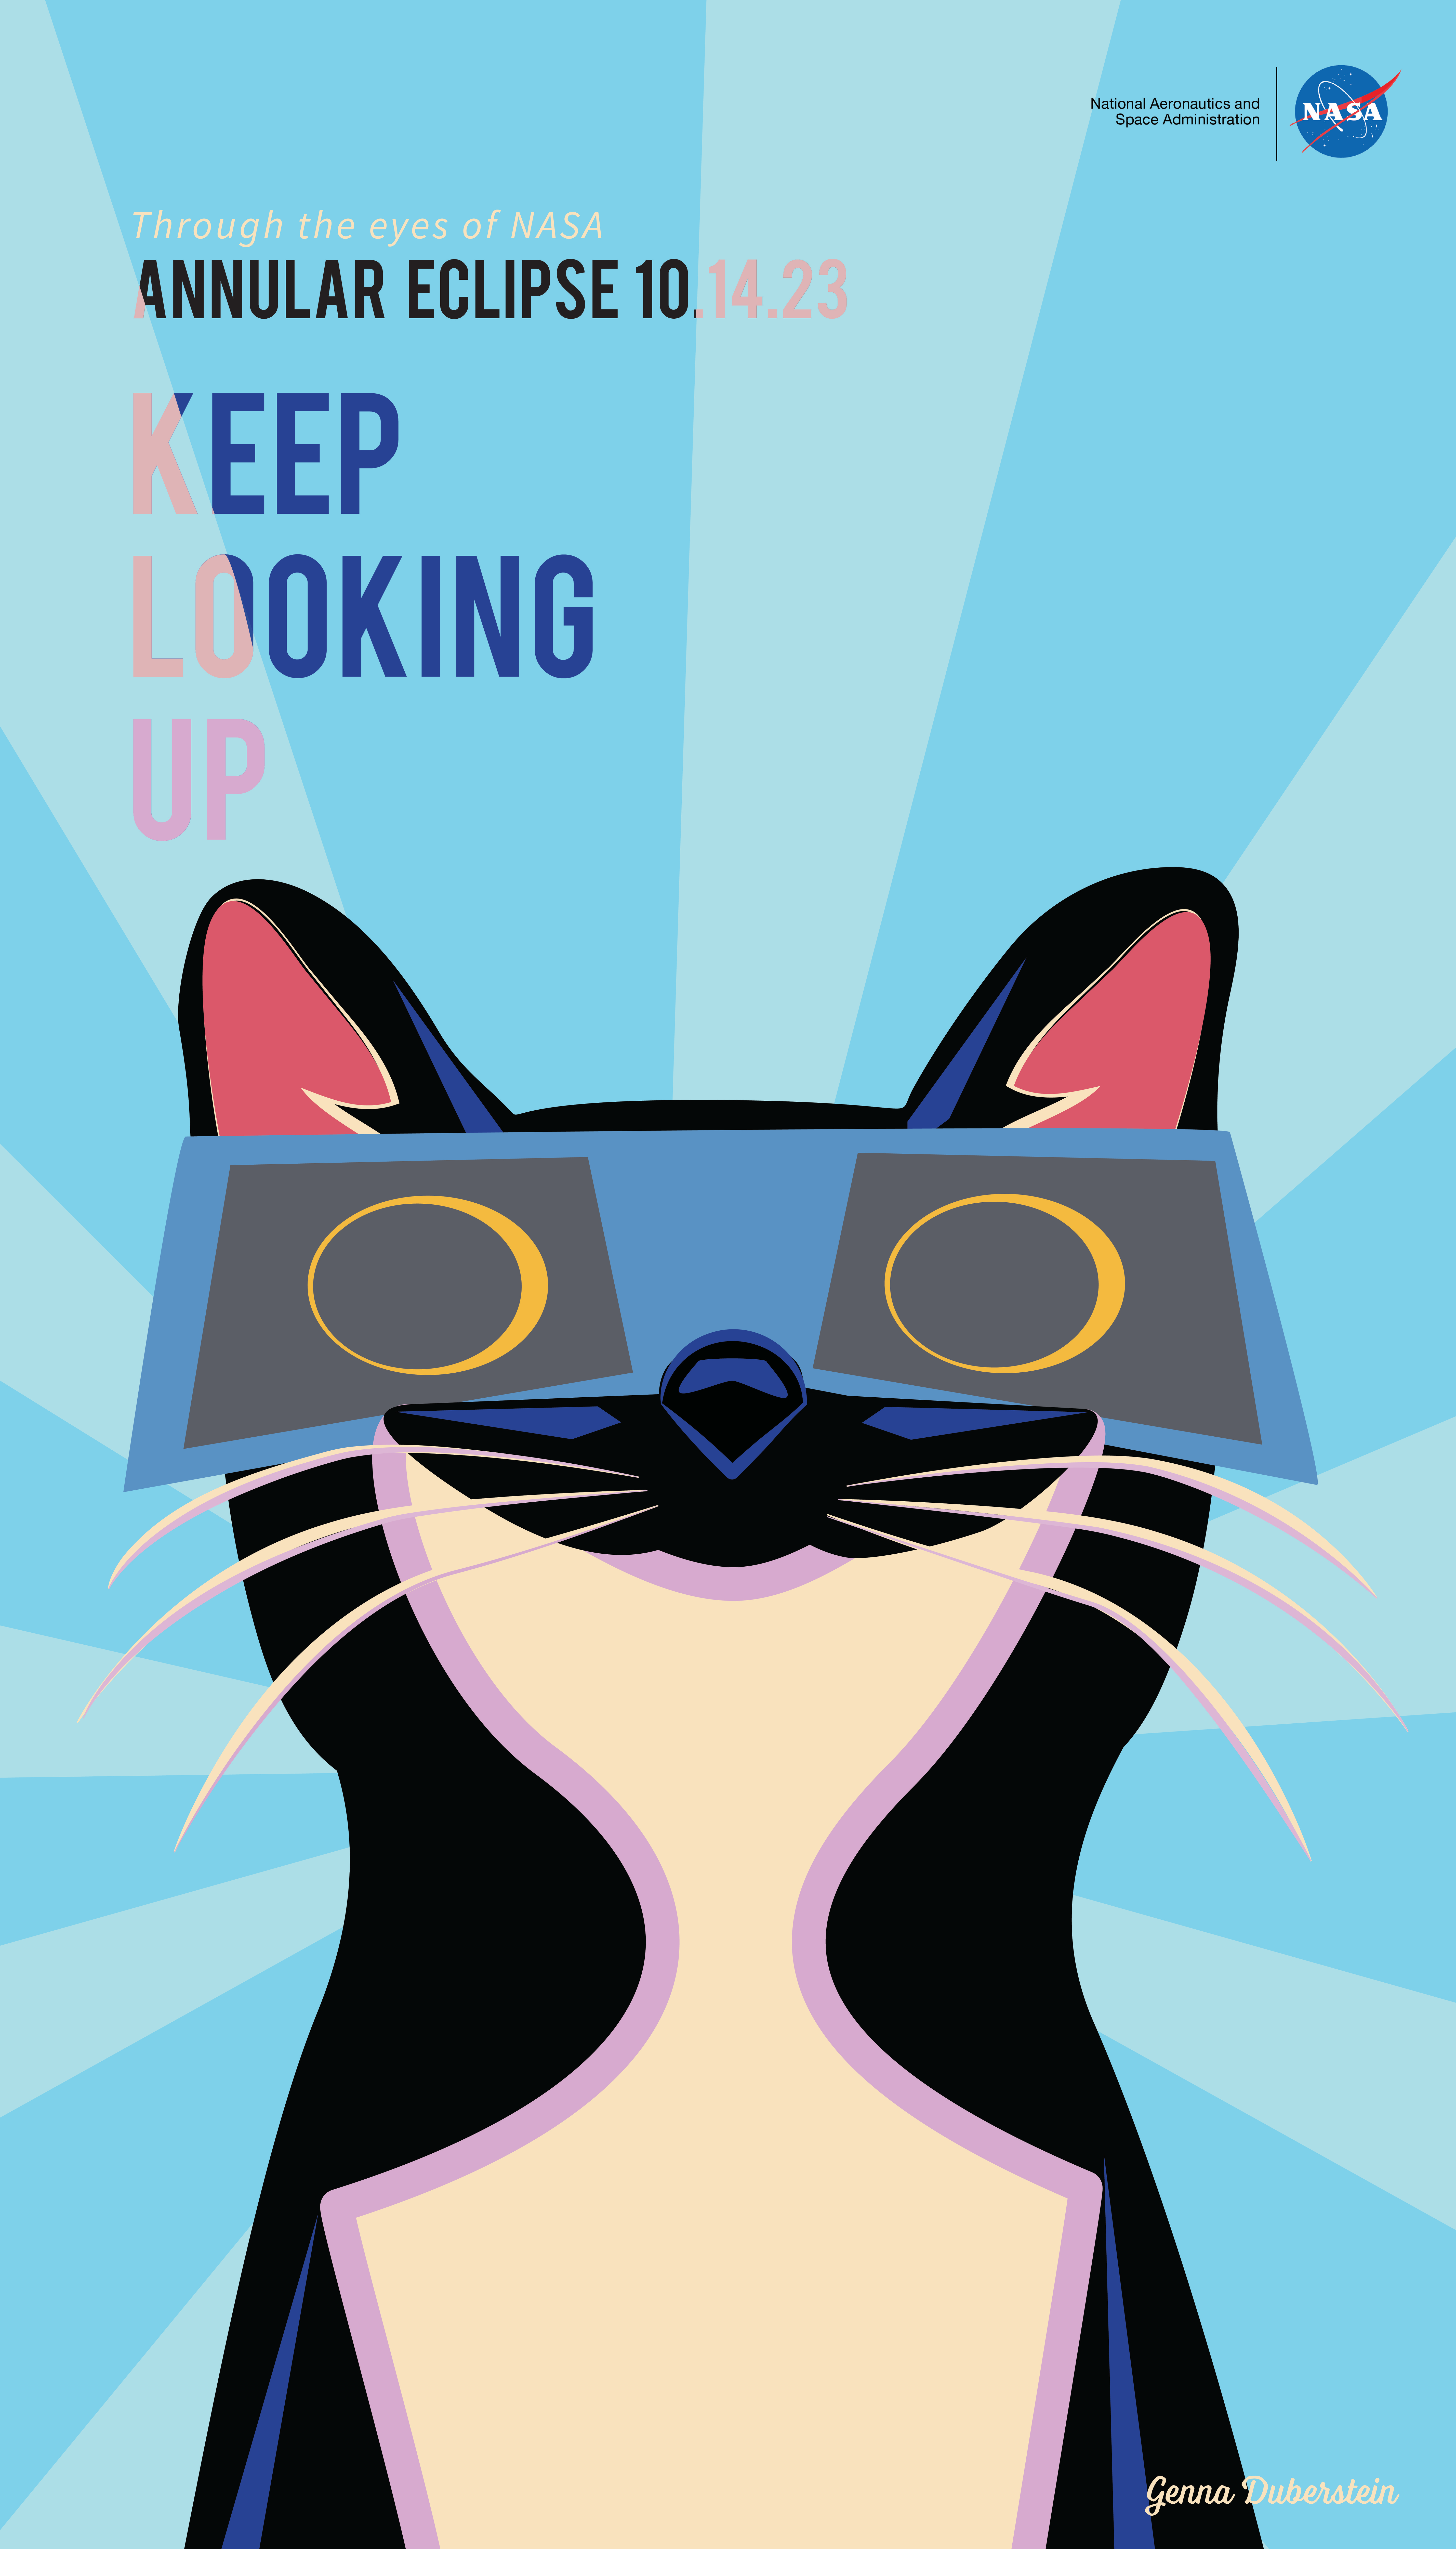 Against a background of two shades of light blue, a cat is shown from the chest up. The cat is black and white with pink on its ears. The cat is wearing eclipse glasses, with an annular solar eclipse reflected in them. The poster says Through the eyes of NASA. Annular Eclipse 10.14.23. Keep Looking Up.